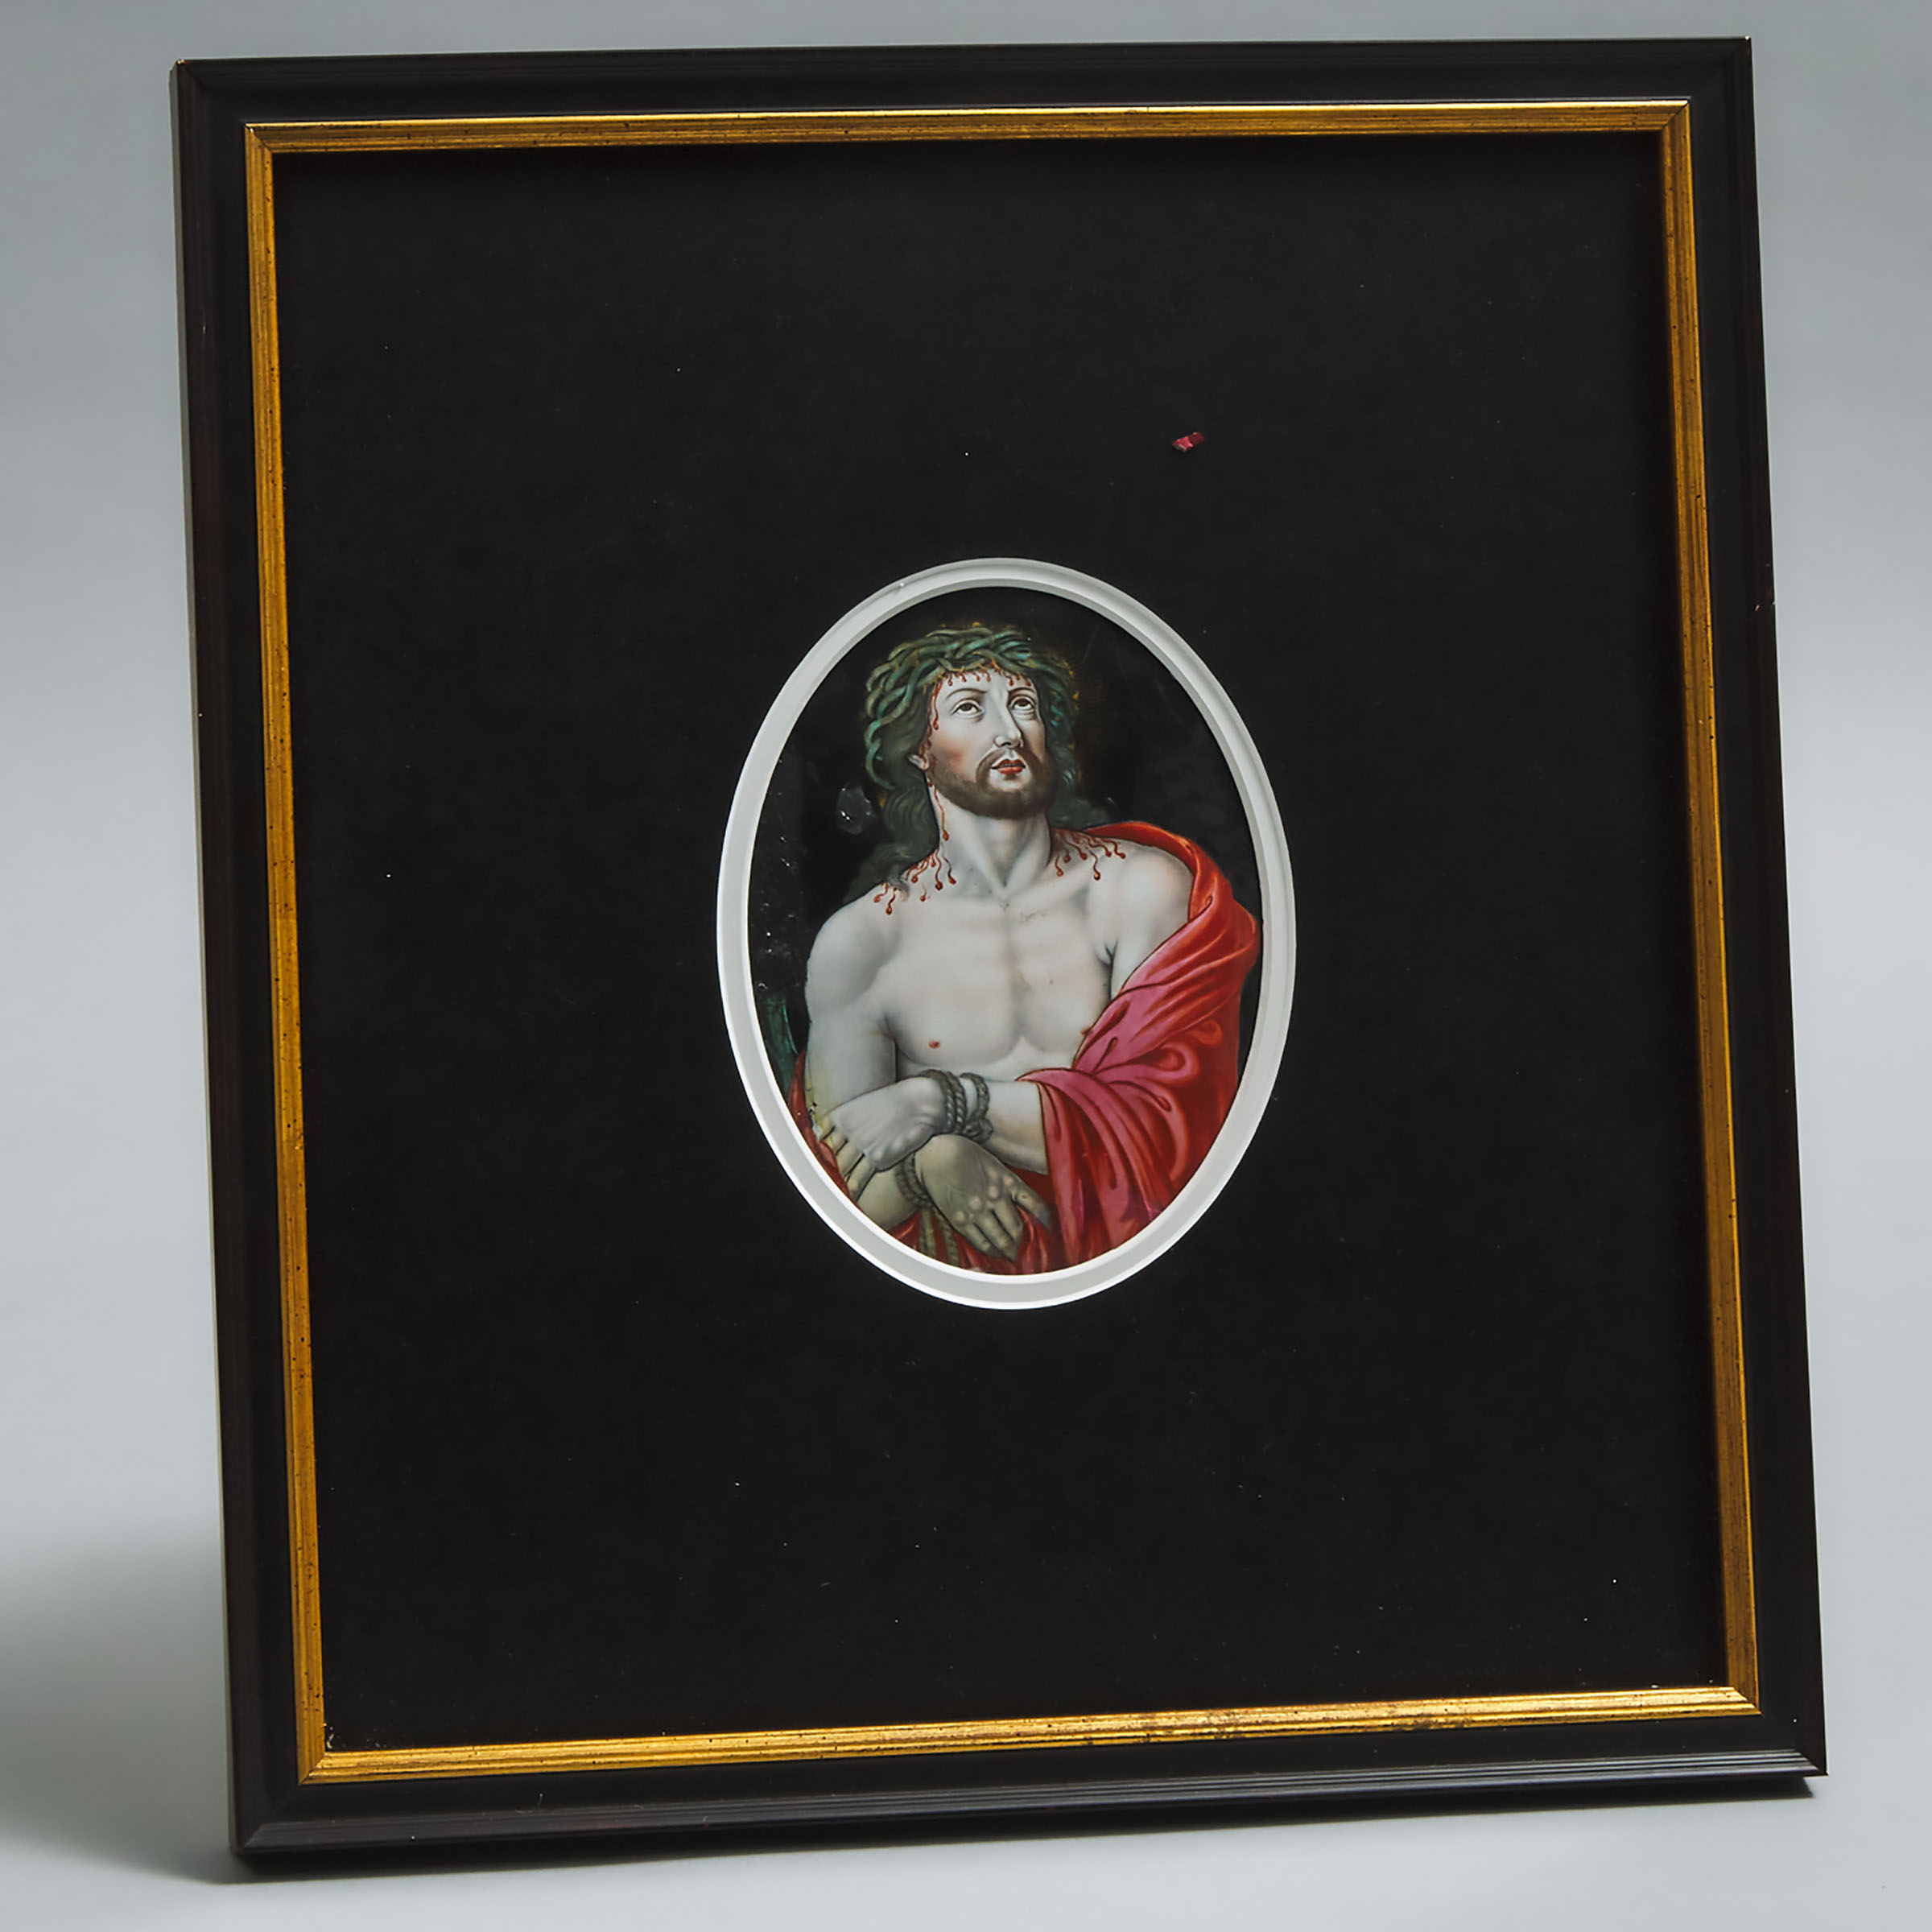 Limoges Enamel Oval Panel of Christ in the Crown of Thorns, 17th/18th century